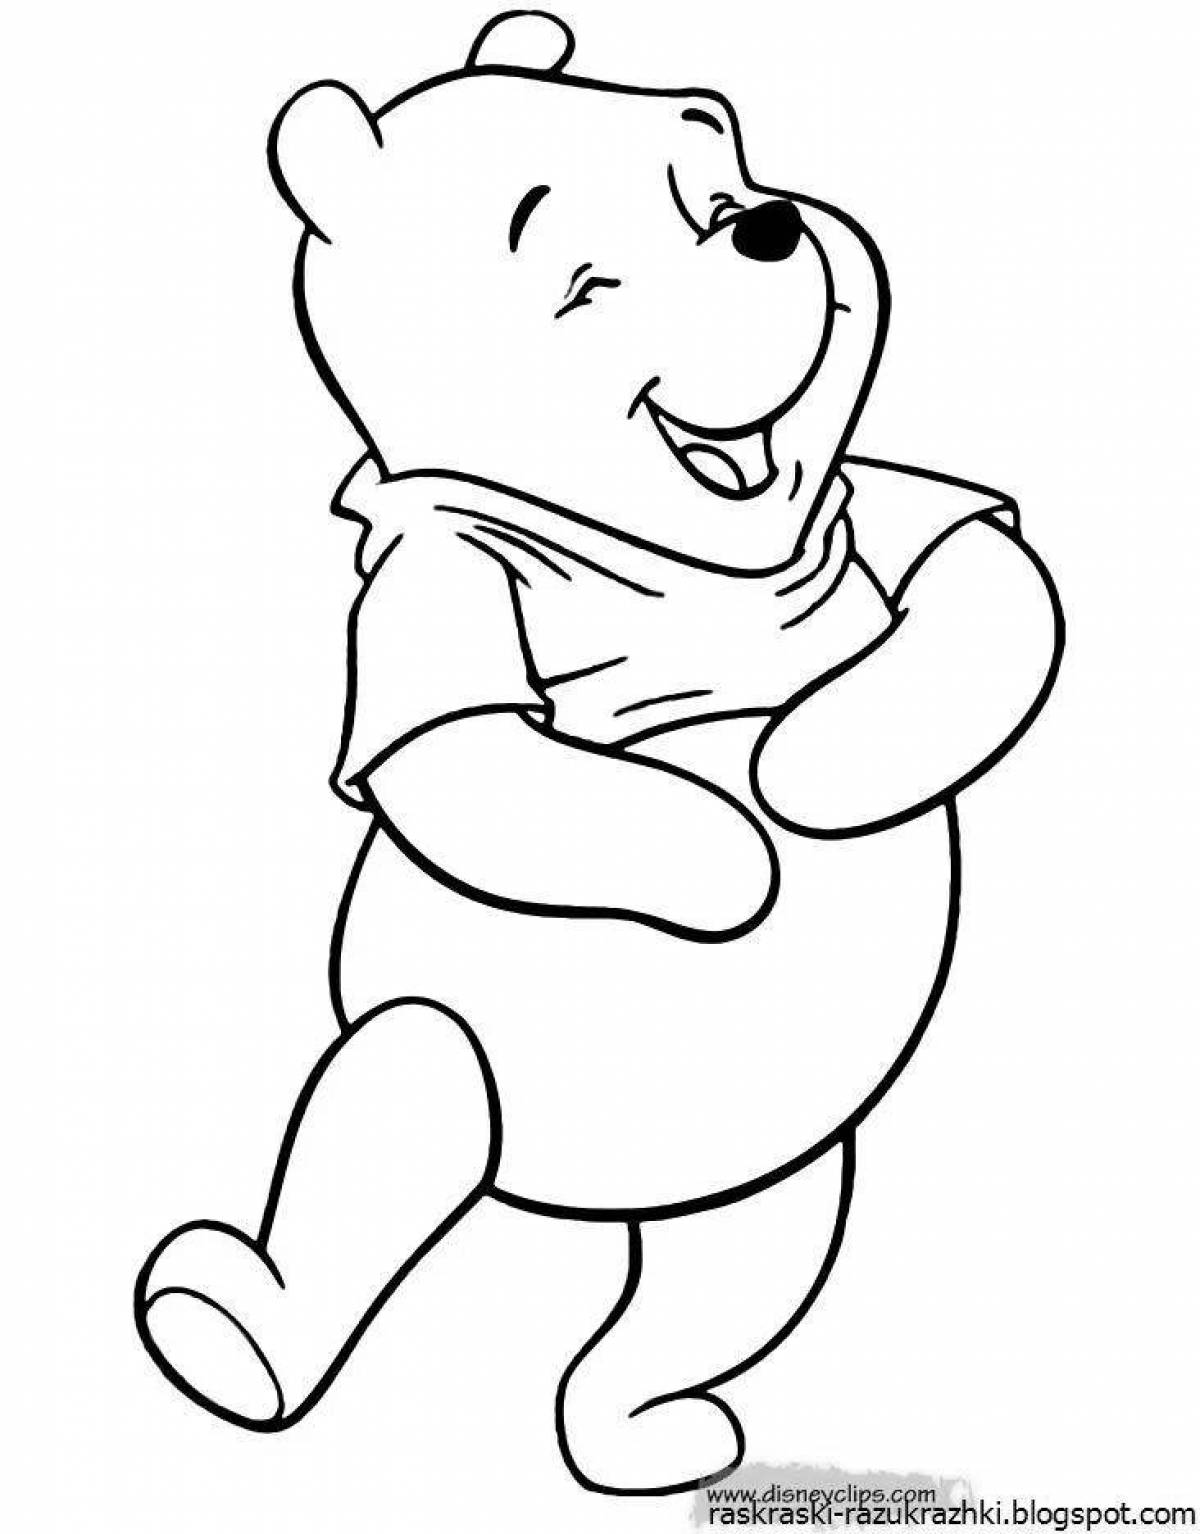 Coloring page of a funny cartoon character